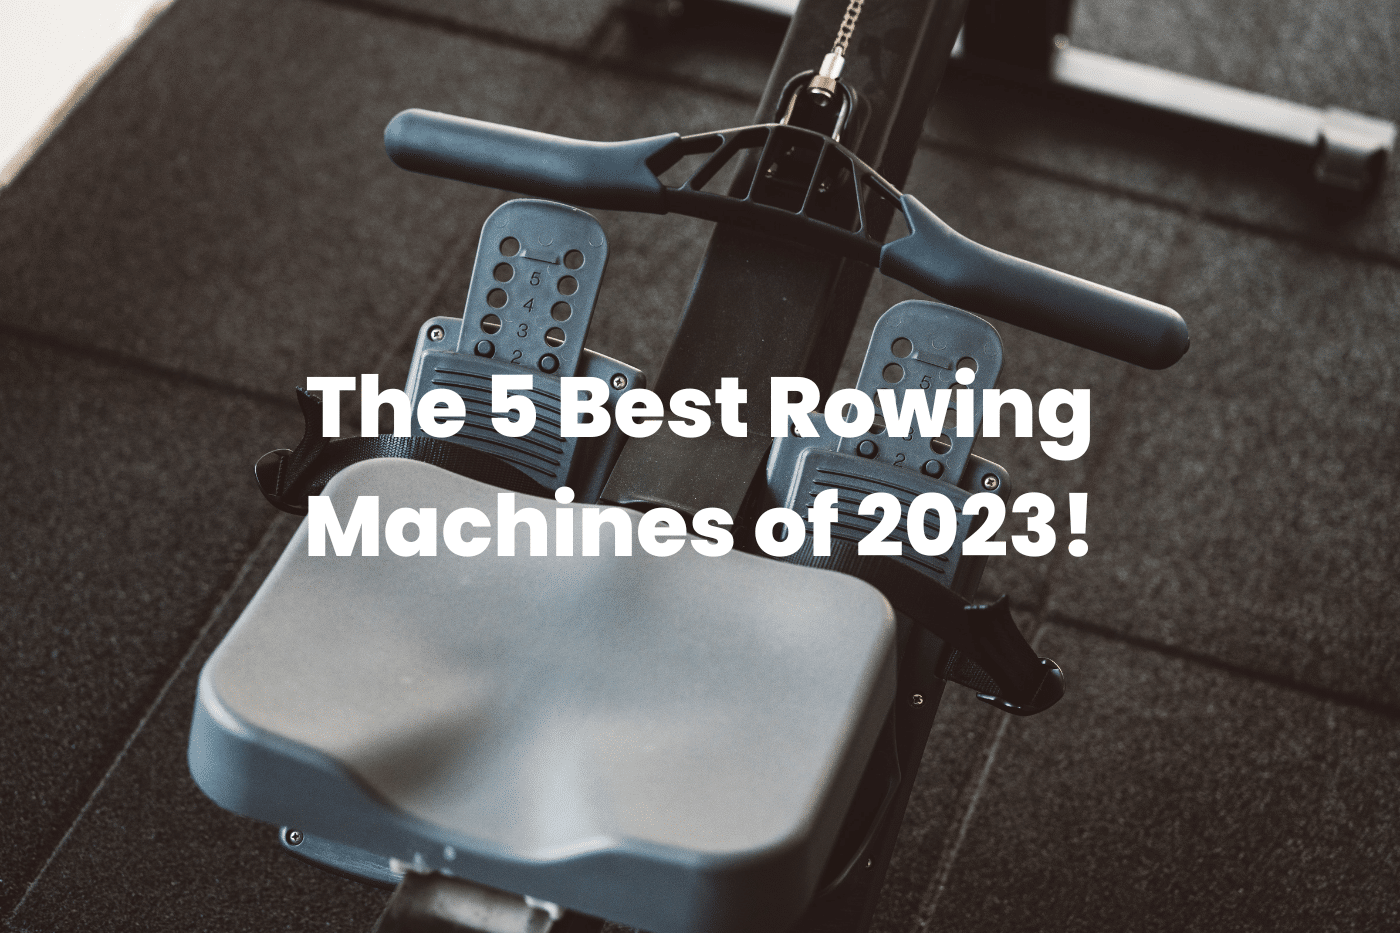 The 5 Best Rowing Machines of 2023